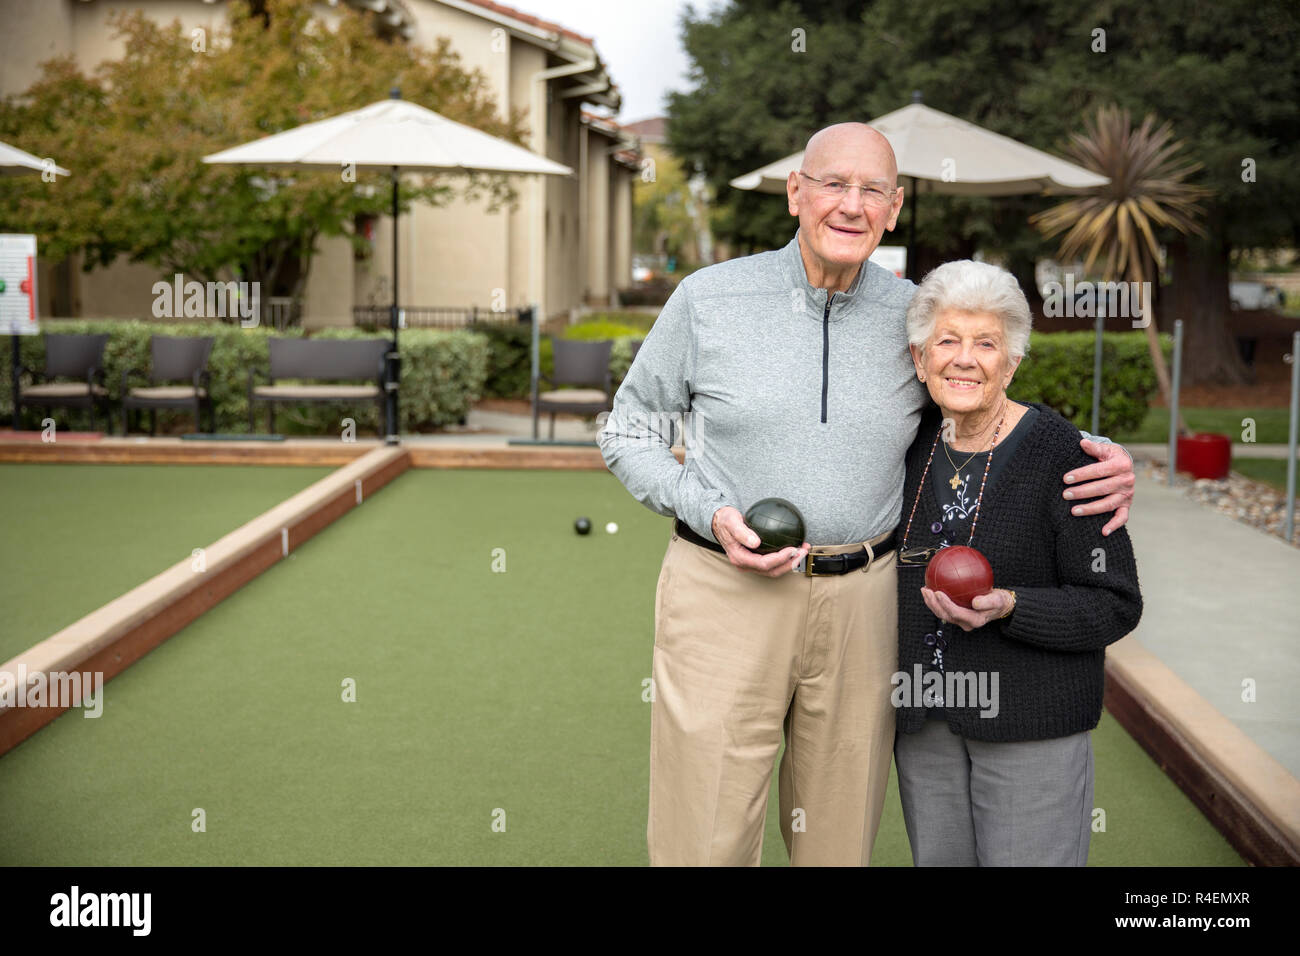 Senior Couple Standing on Bowling Green Holding Bowling Balls Stock Photo